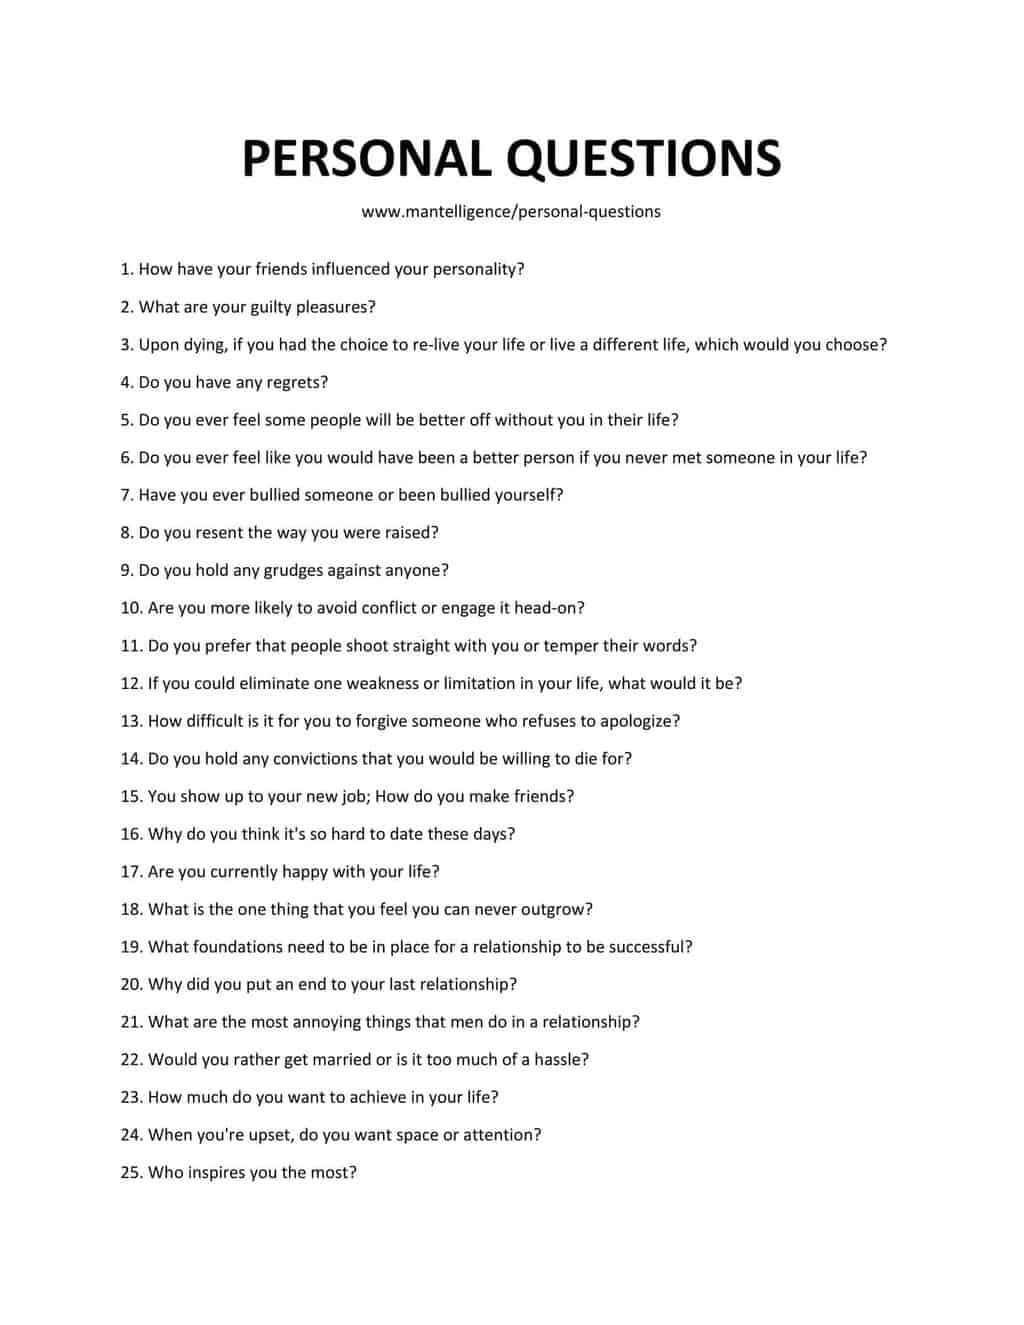 Personality questions to ask someone